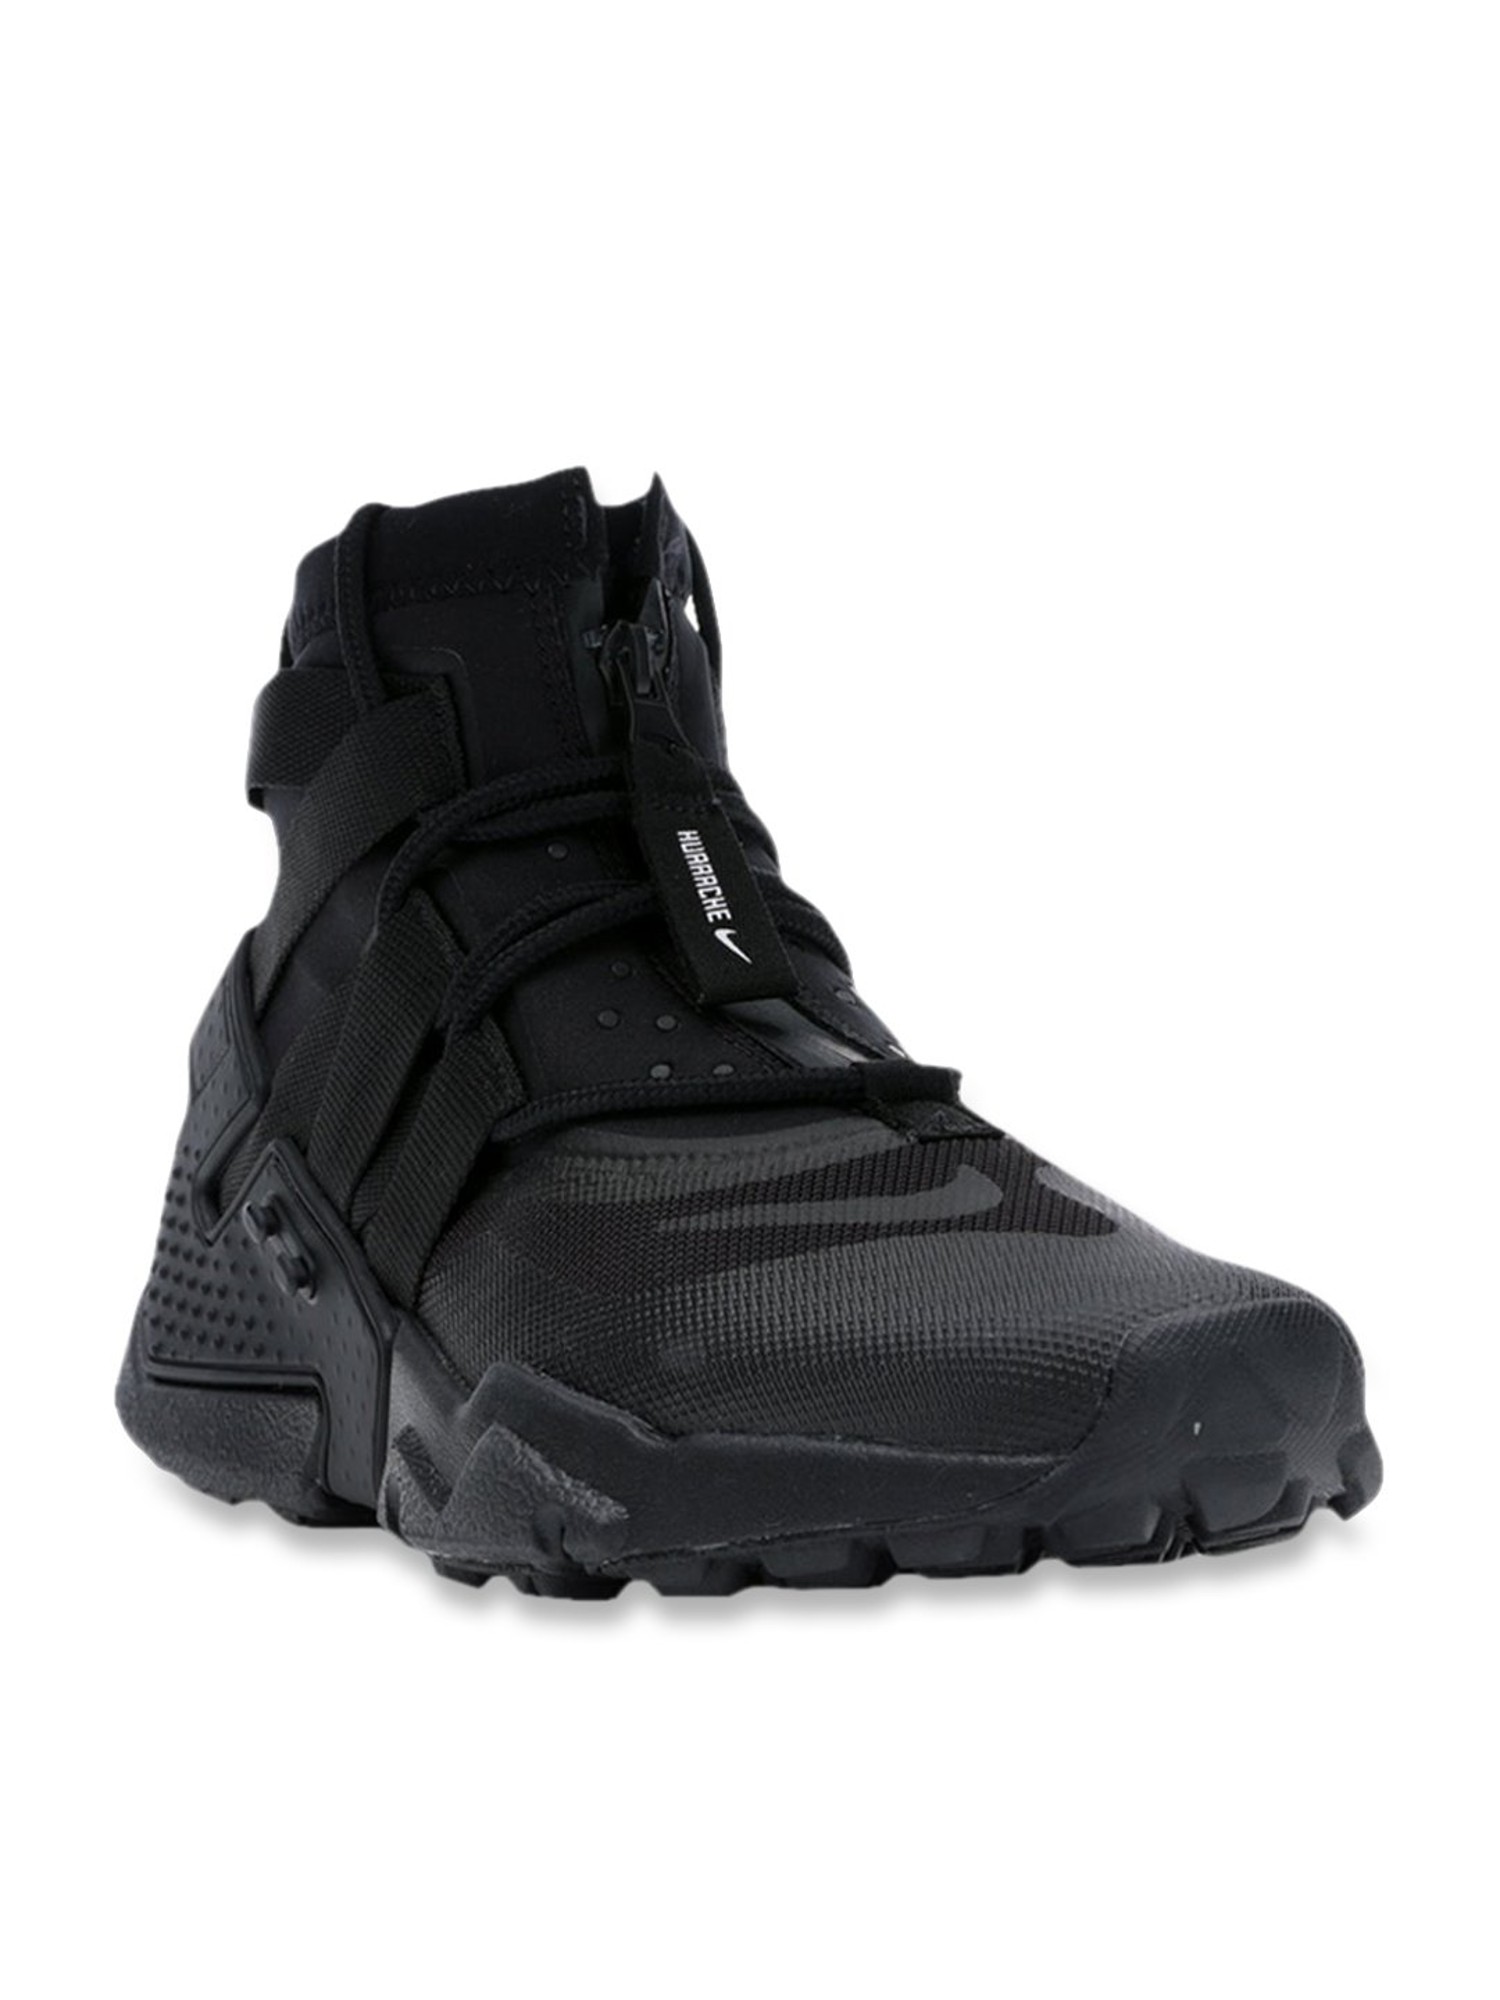 nike black high ankle shoes